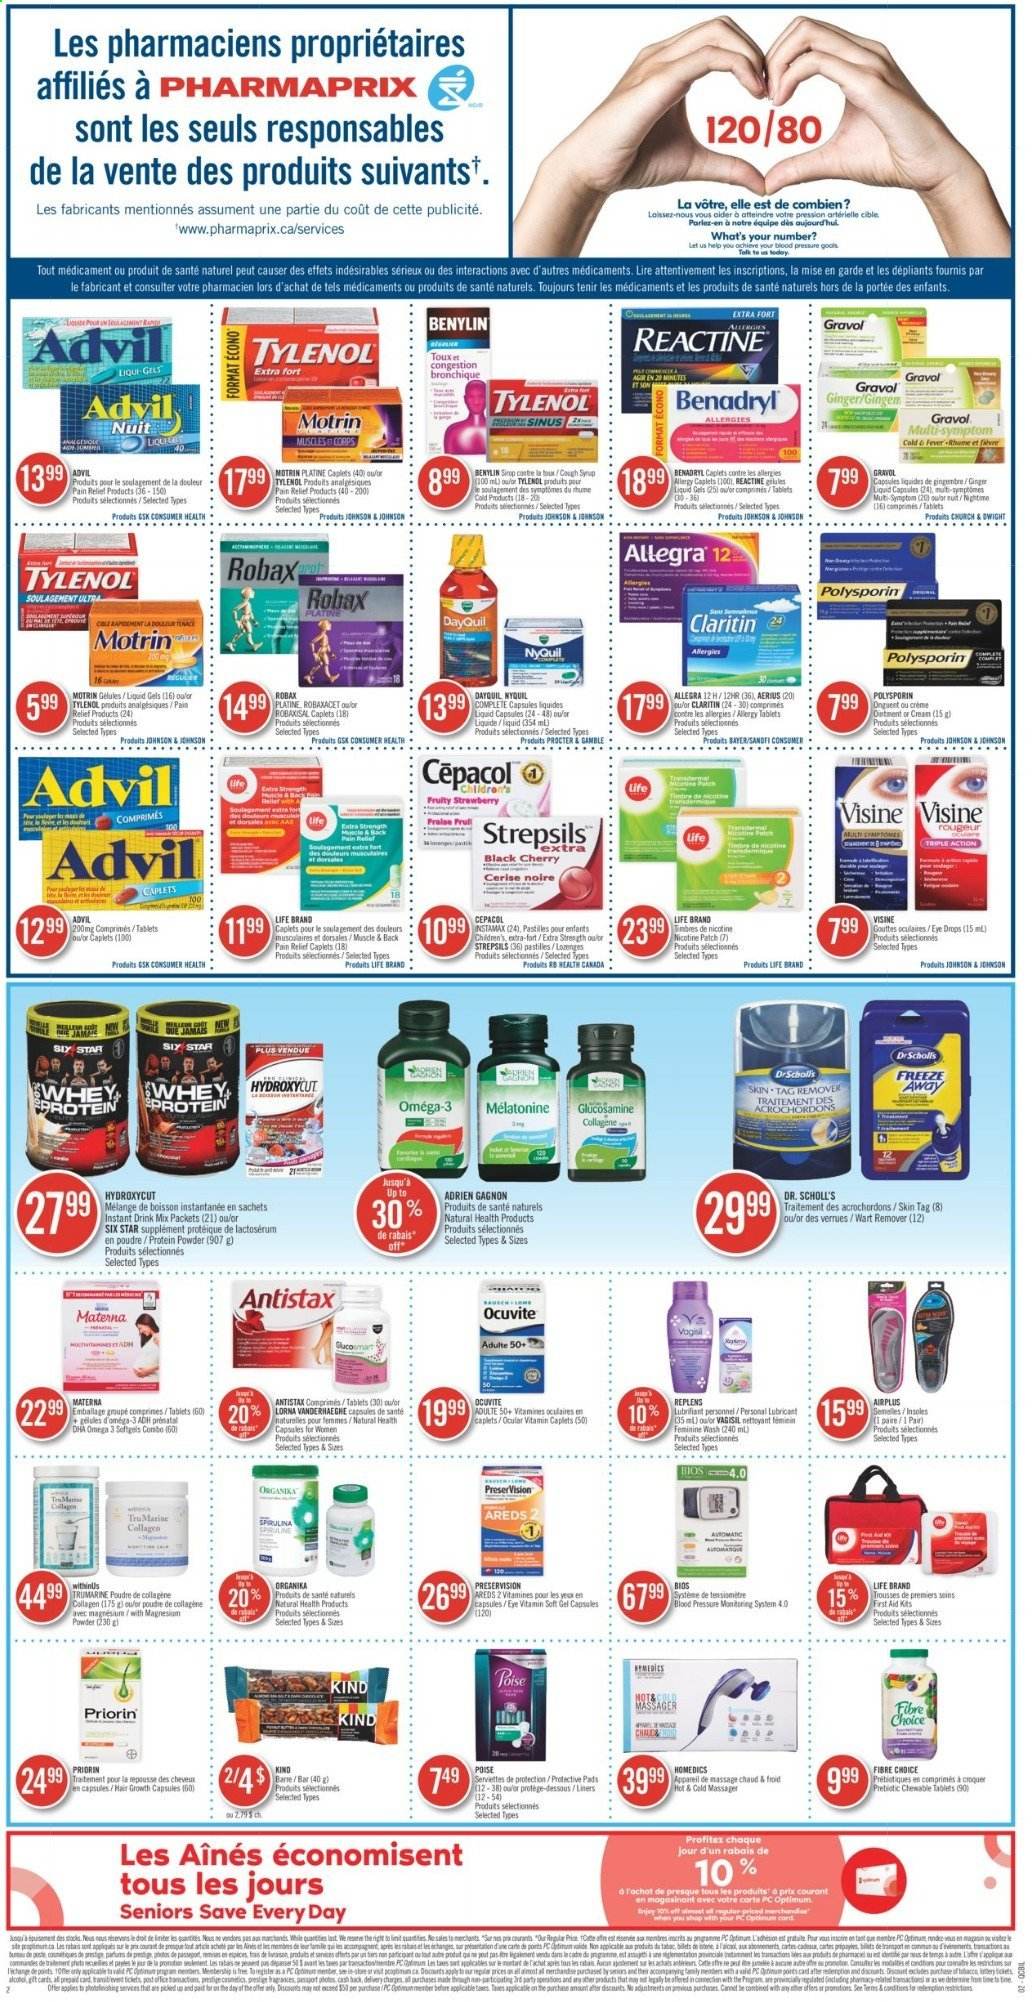 thumbnail - Pharmaprix Flyer - April 10, 2021 - April 16, 2021 - Sales products - ginger, cherries, pastilles, syrup, Johnson's, lubricant, massager, Prenatal, pain relief, DayQuil, glucosamine, magnesium, Tylenol, NyQuil, Omega-3, eye drops, Advil Rapid, whey protein, Strepsils, spirulina, Bayer, Benylin, Motrin, Dr. Scholl's. Page 2.